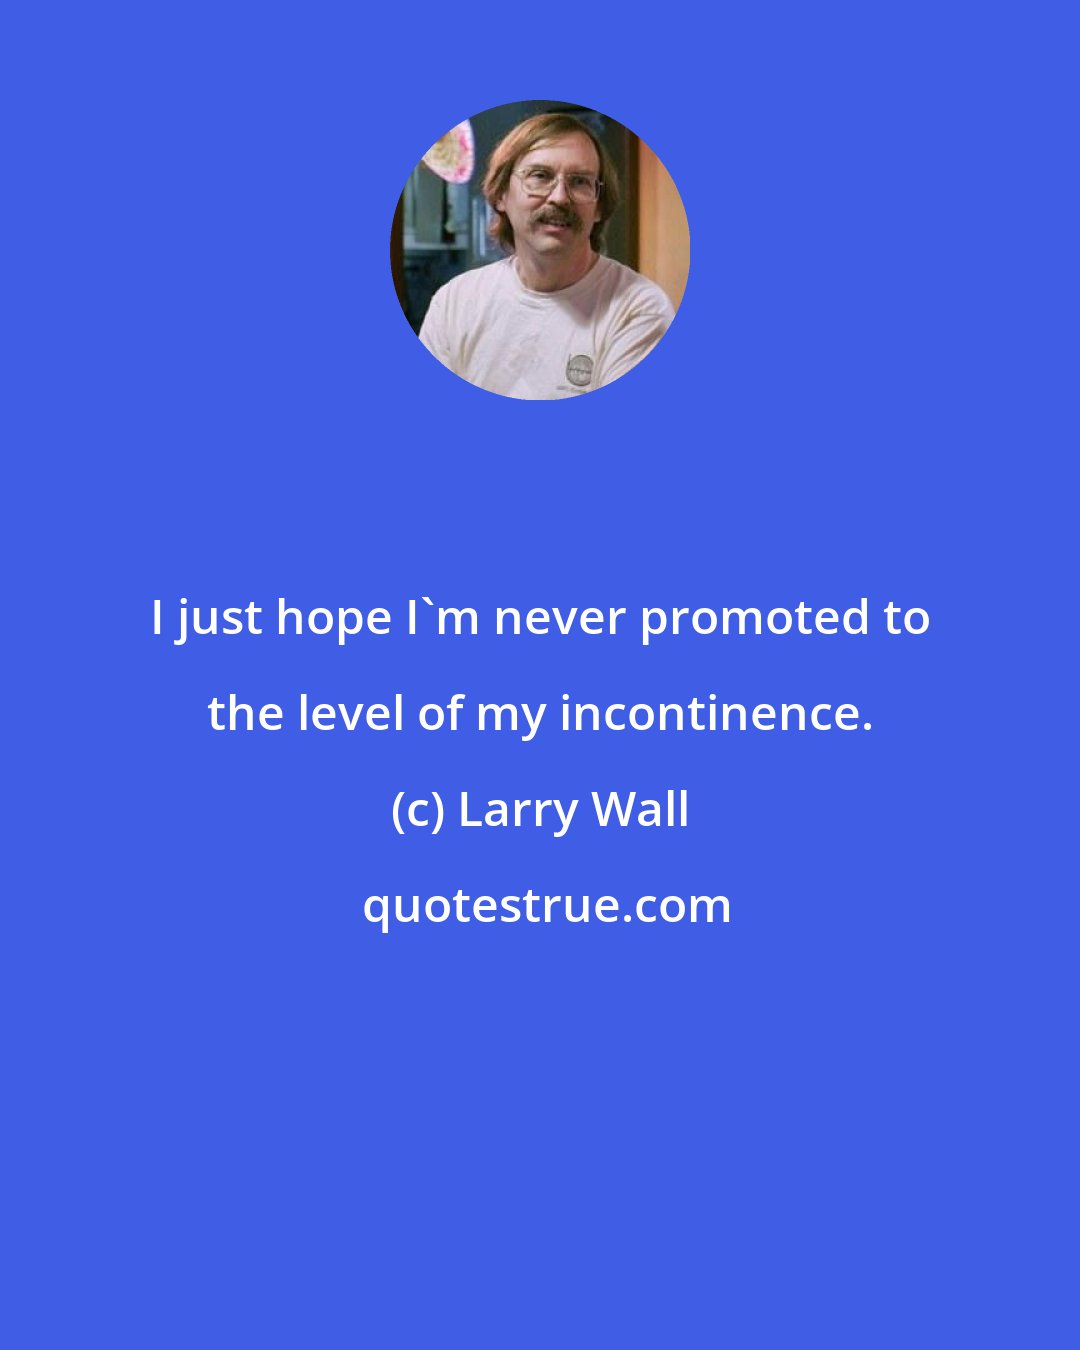 Larry Wall: I just hope I'm never promoted to the level of my incontinence.